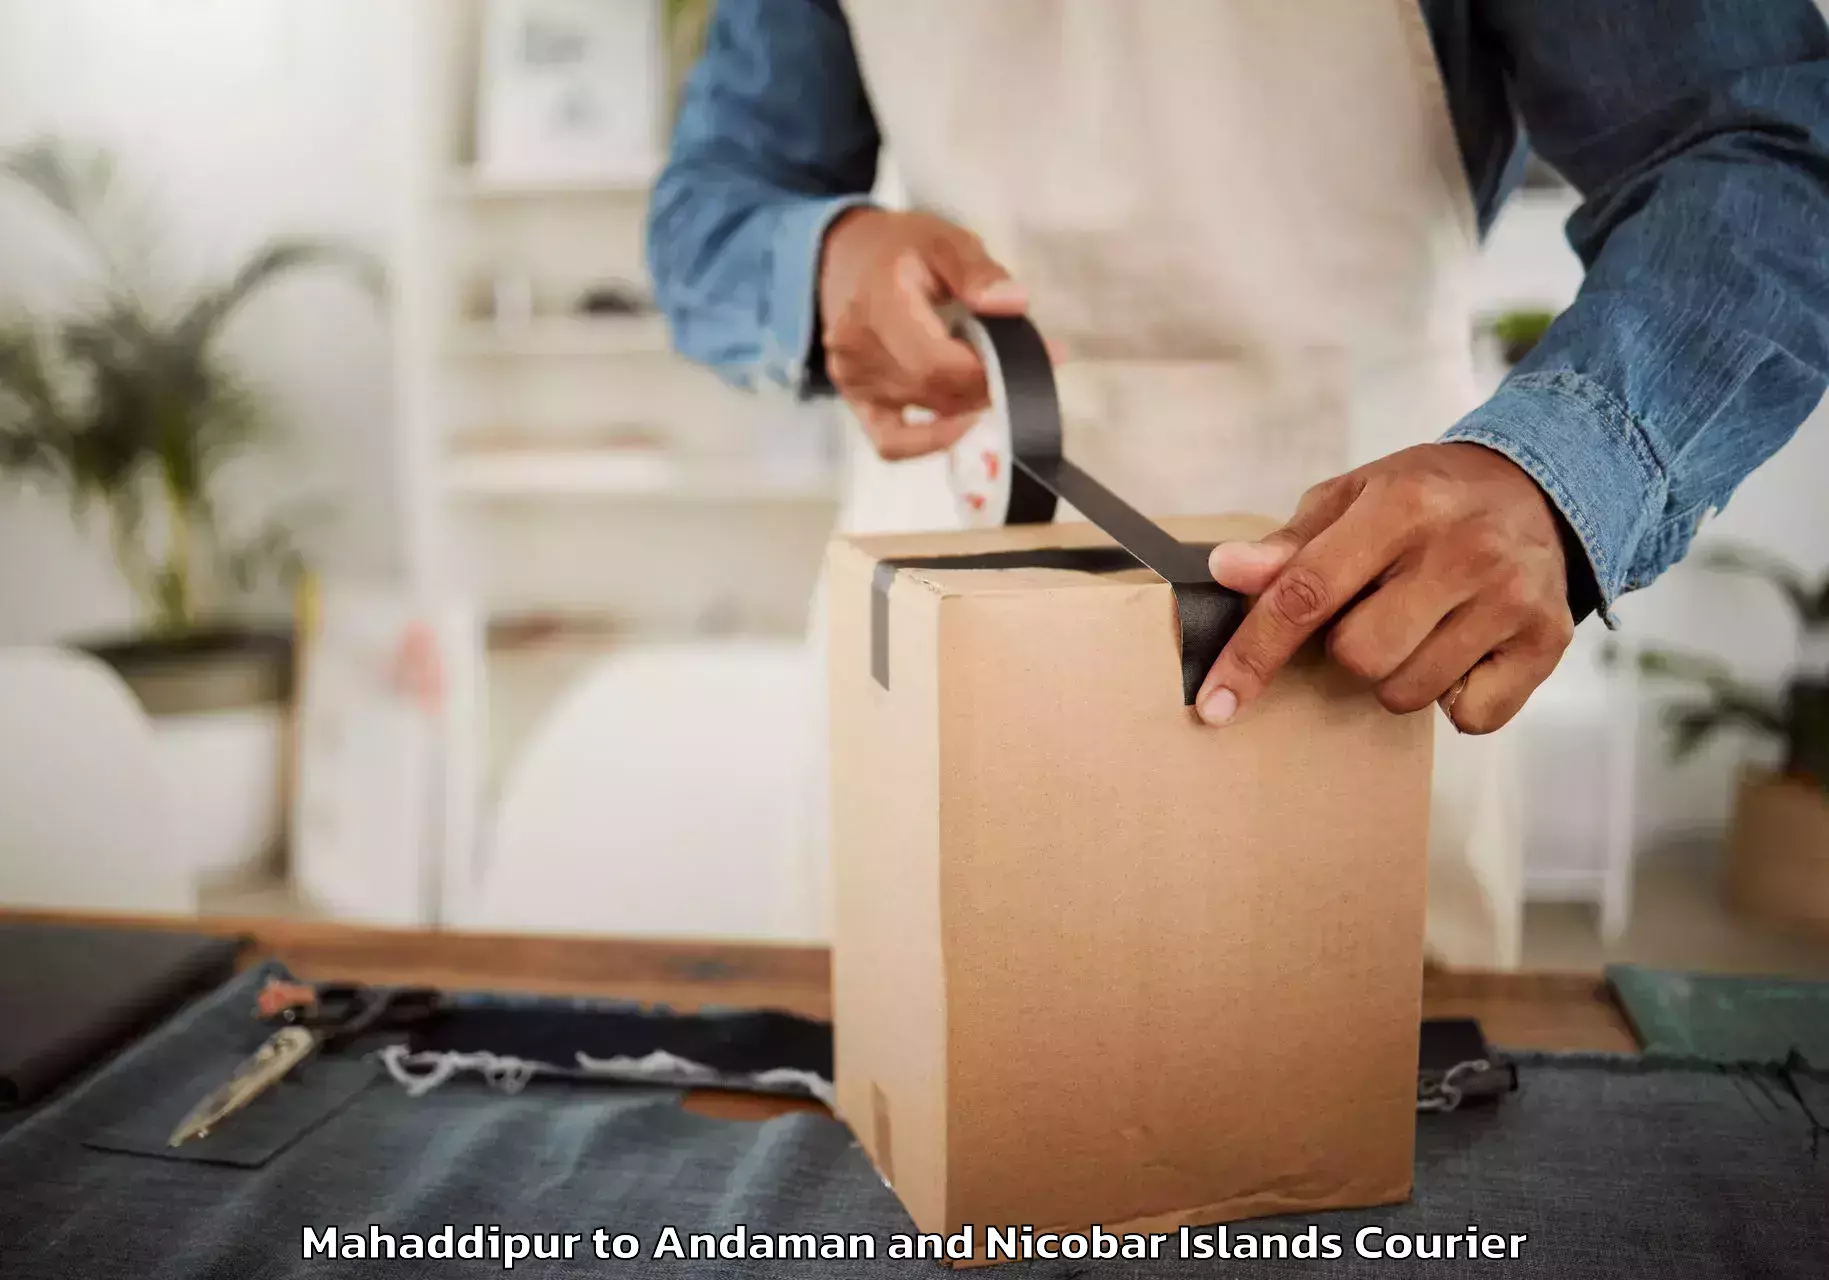 Trusted furniture movers in Mahaddipur to Nicobar